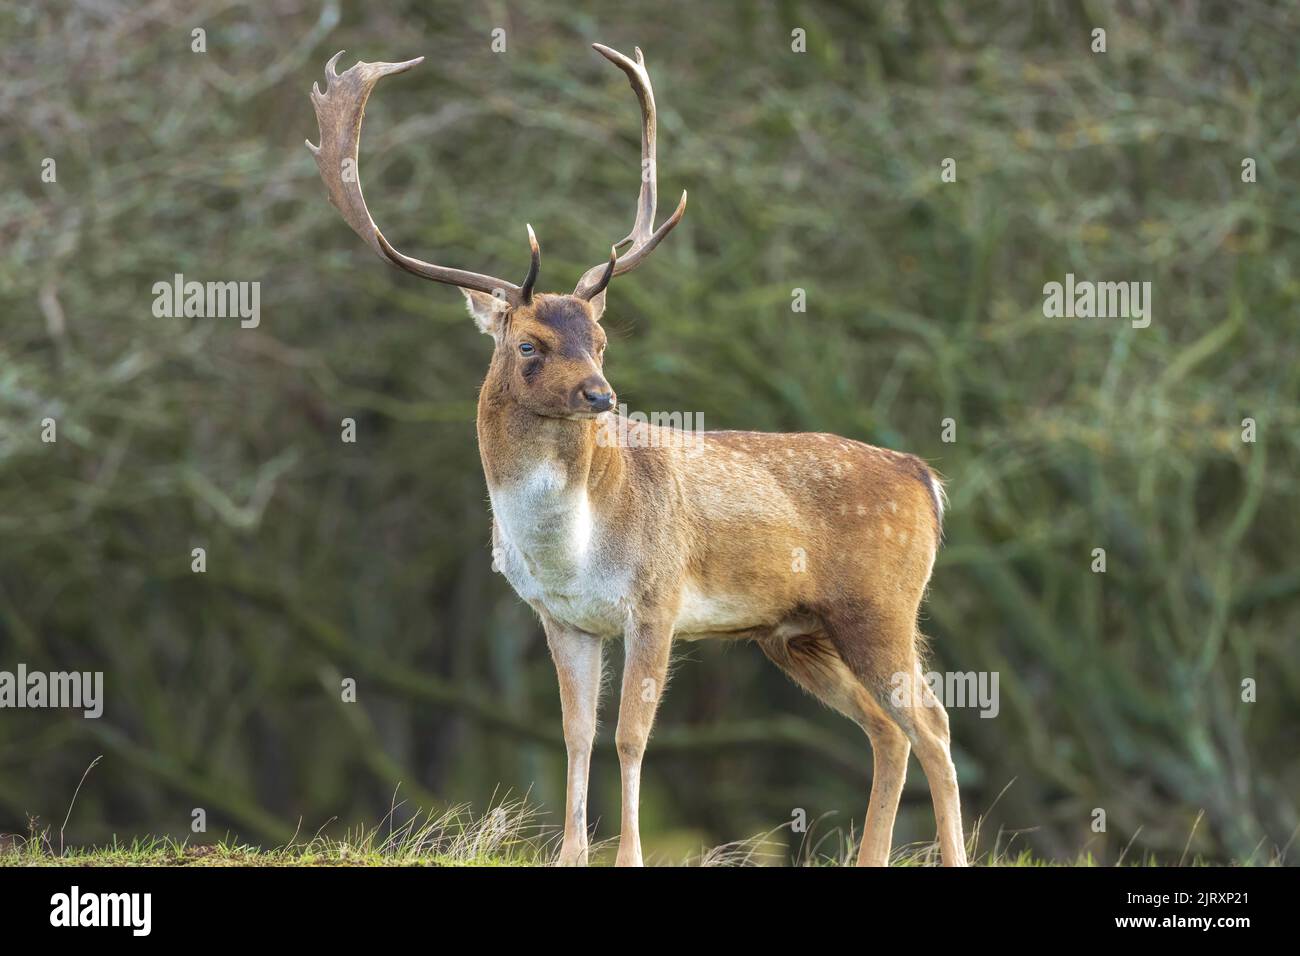 Fallow deer Dama Dama male stag during rutting season. The Autumn sunlight and nature colors are clearly visible on the background. Stock Photo